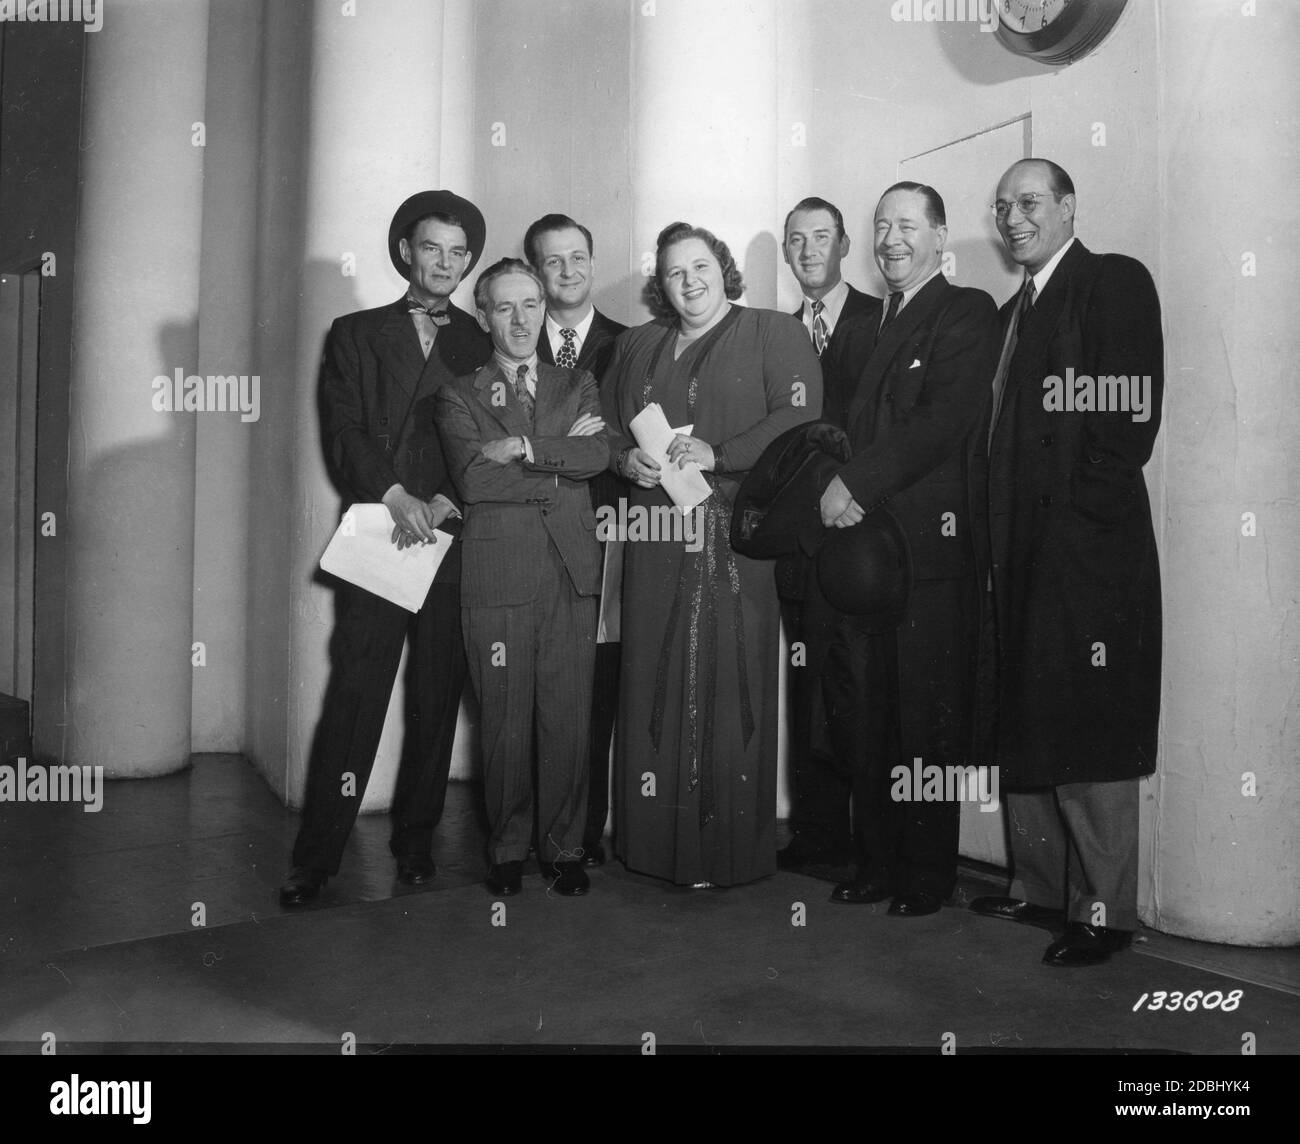 The cast of 'Command Performance USA,' the War Department radio program headed by Kate Smith (1907-1986), as they leave CBS Playhouse #2. (L-r): Announcer Ed Gerdner, Barry Wood, Miss Smith, Henry (Henny) Youngman, Robert Benchley and Ted Husing, New York, NY, 3/13/1942. (Photo by US Army Signal Corps/RBM Vintage Images) Stock Photo